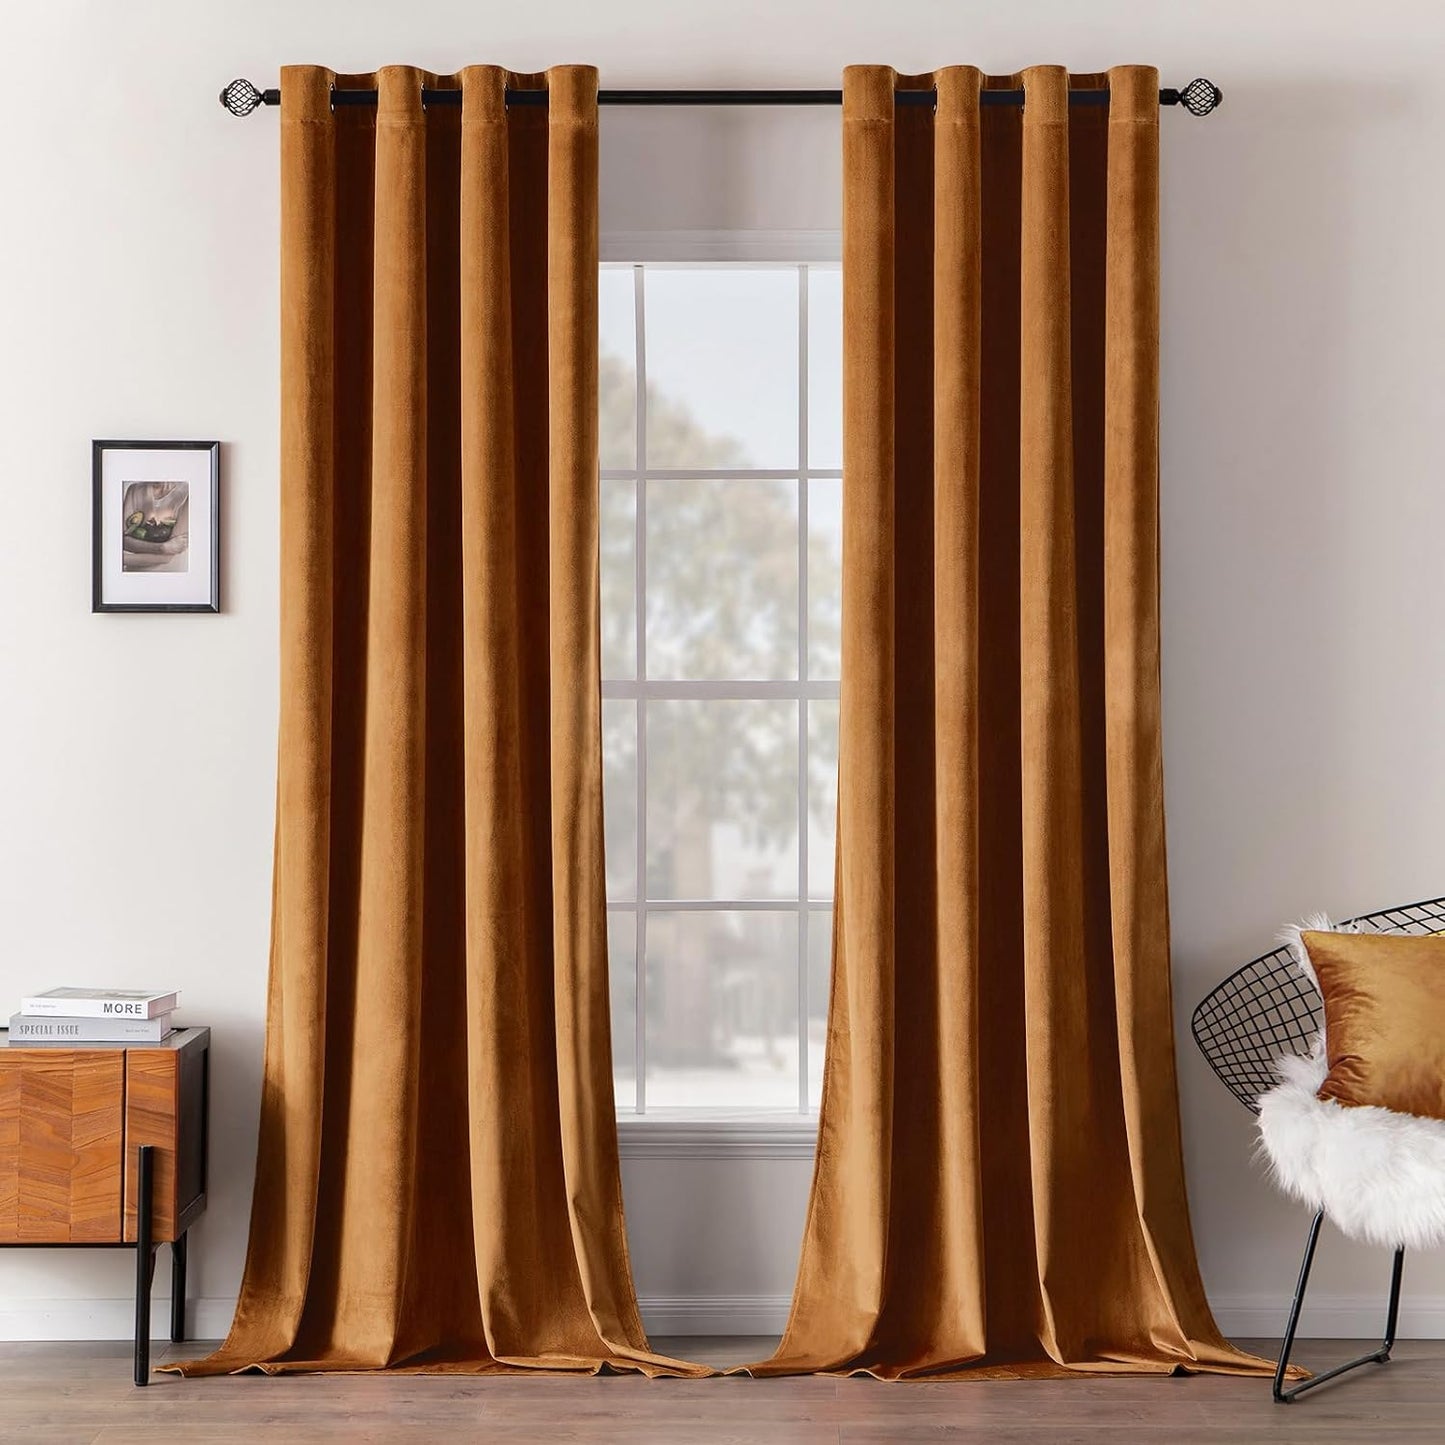 MIULEE Velvet Curtains Olive Green Elegant Grommet Curtains Thermal Insulated Soundproof Room Darkening Curtains/Drapes for Classical Living Room Bedroom Decor 52 X 84 Inch Set of 2  MIULEE Gold Brown W52 X L96 